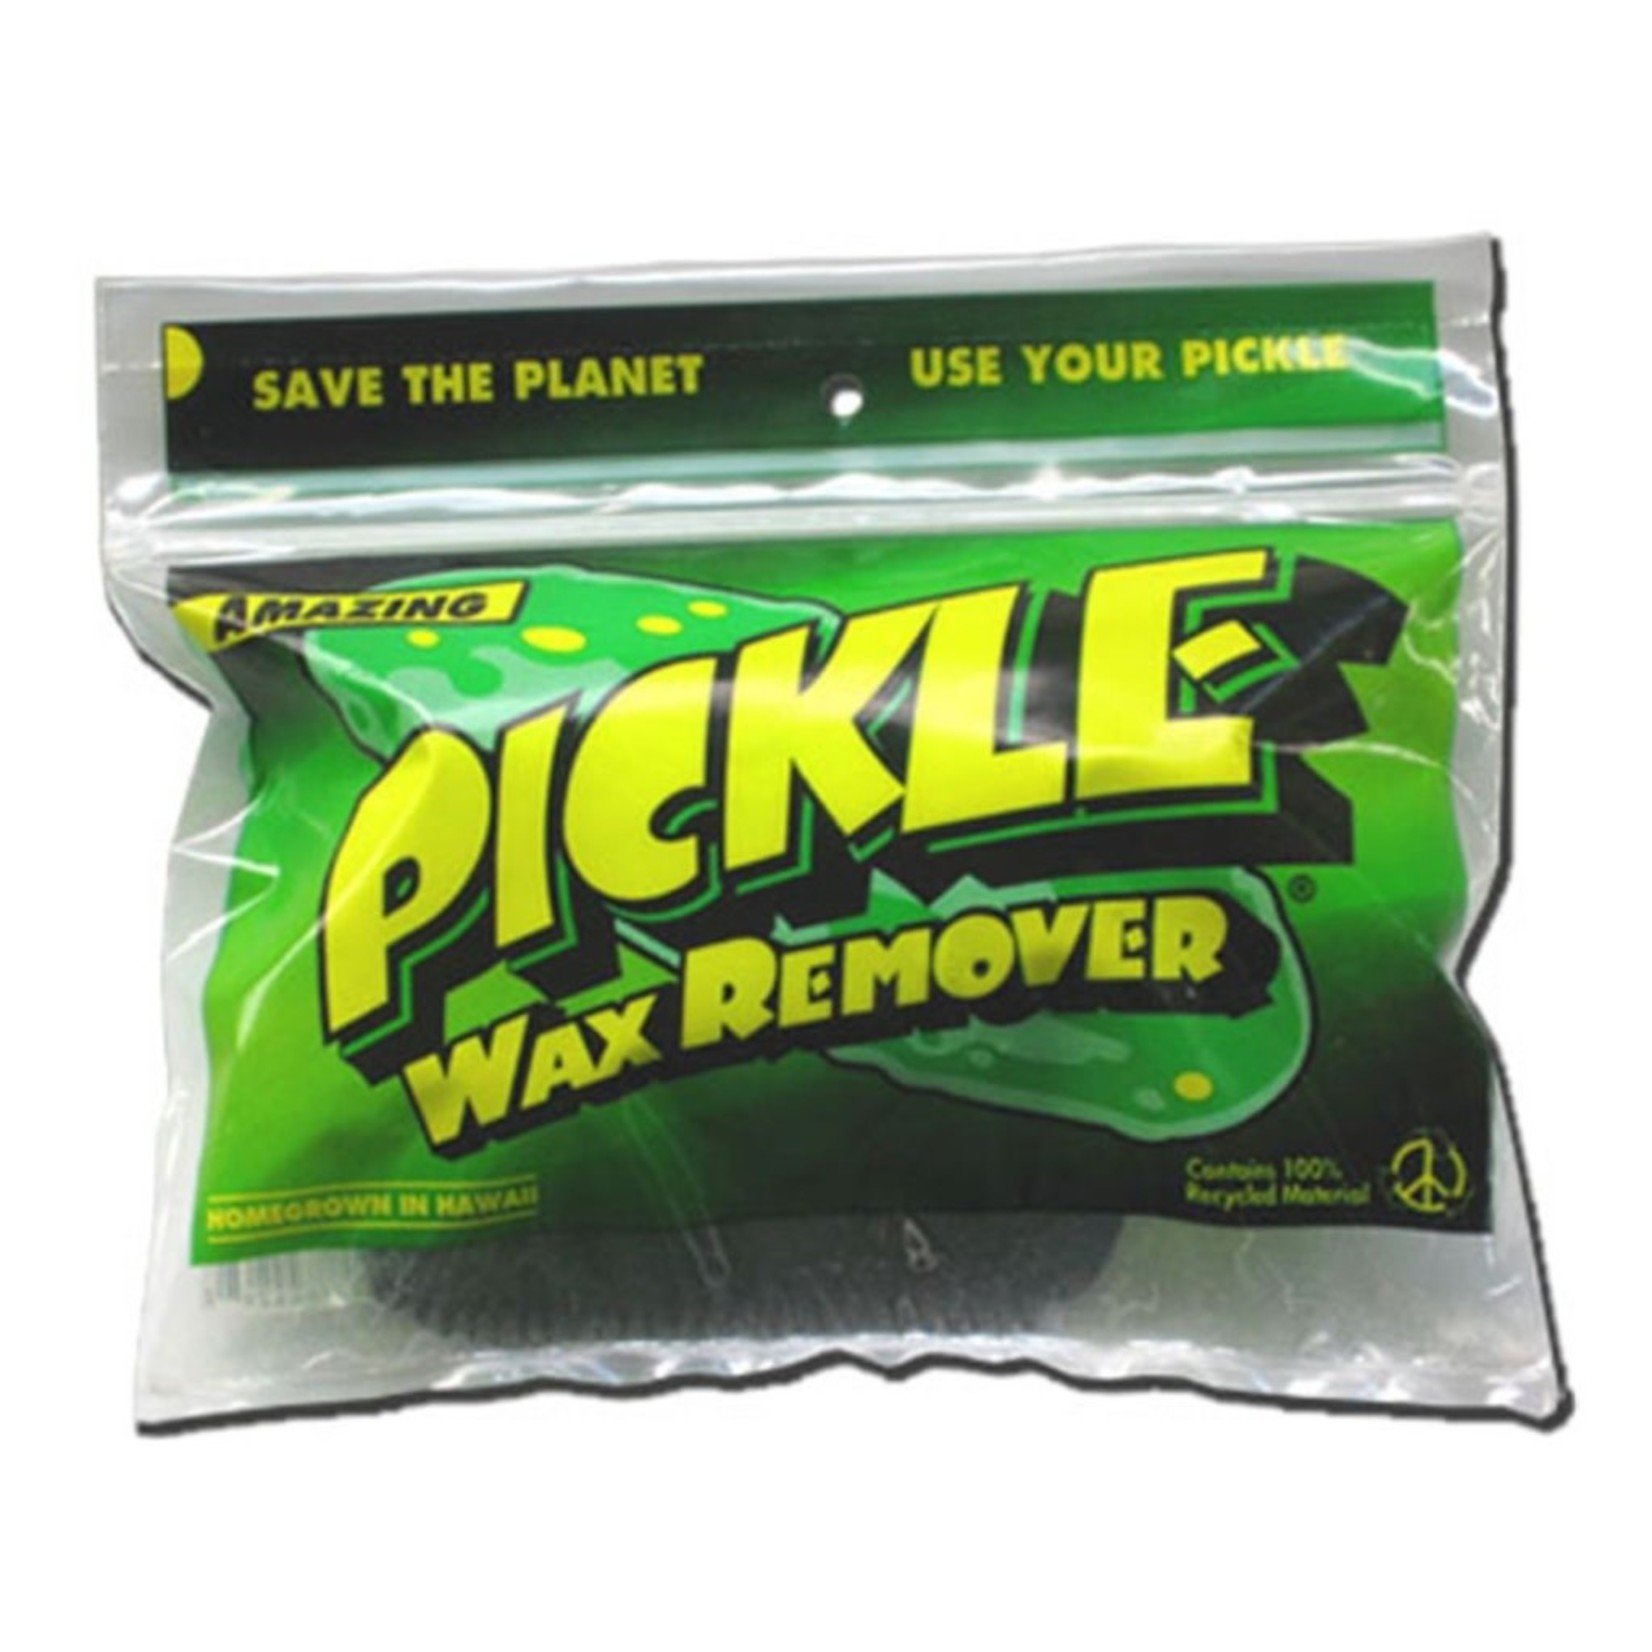 Pickle Pickle Wax Remover by Team Chow Hawaii